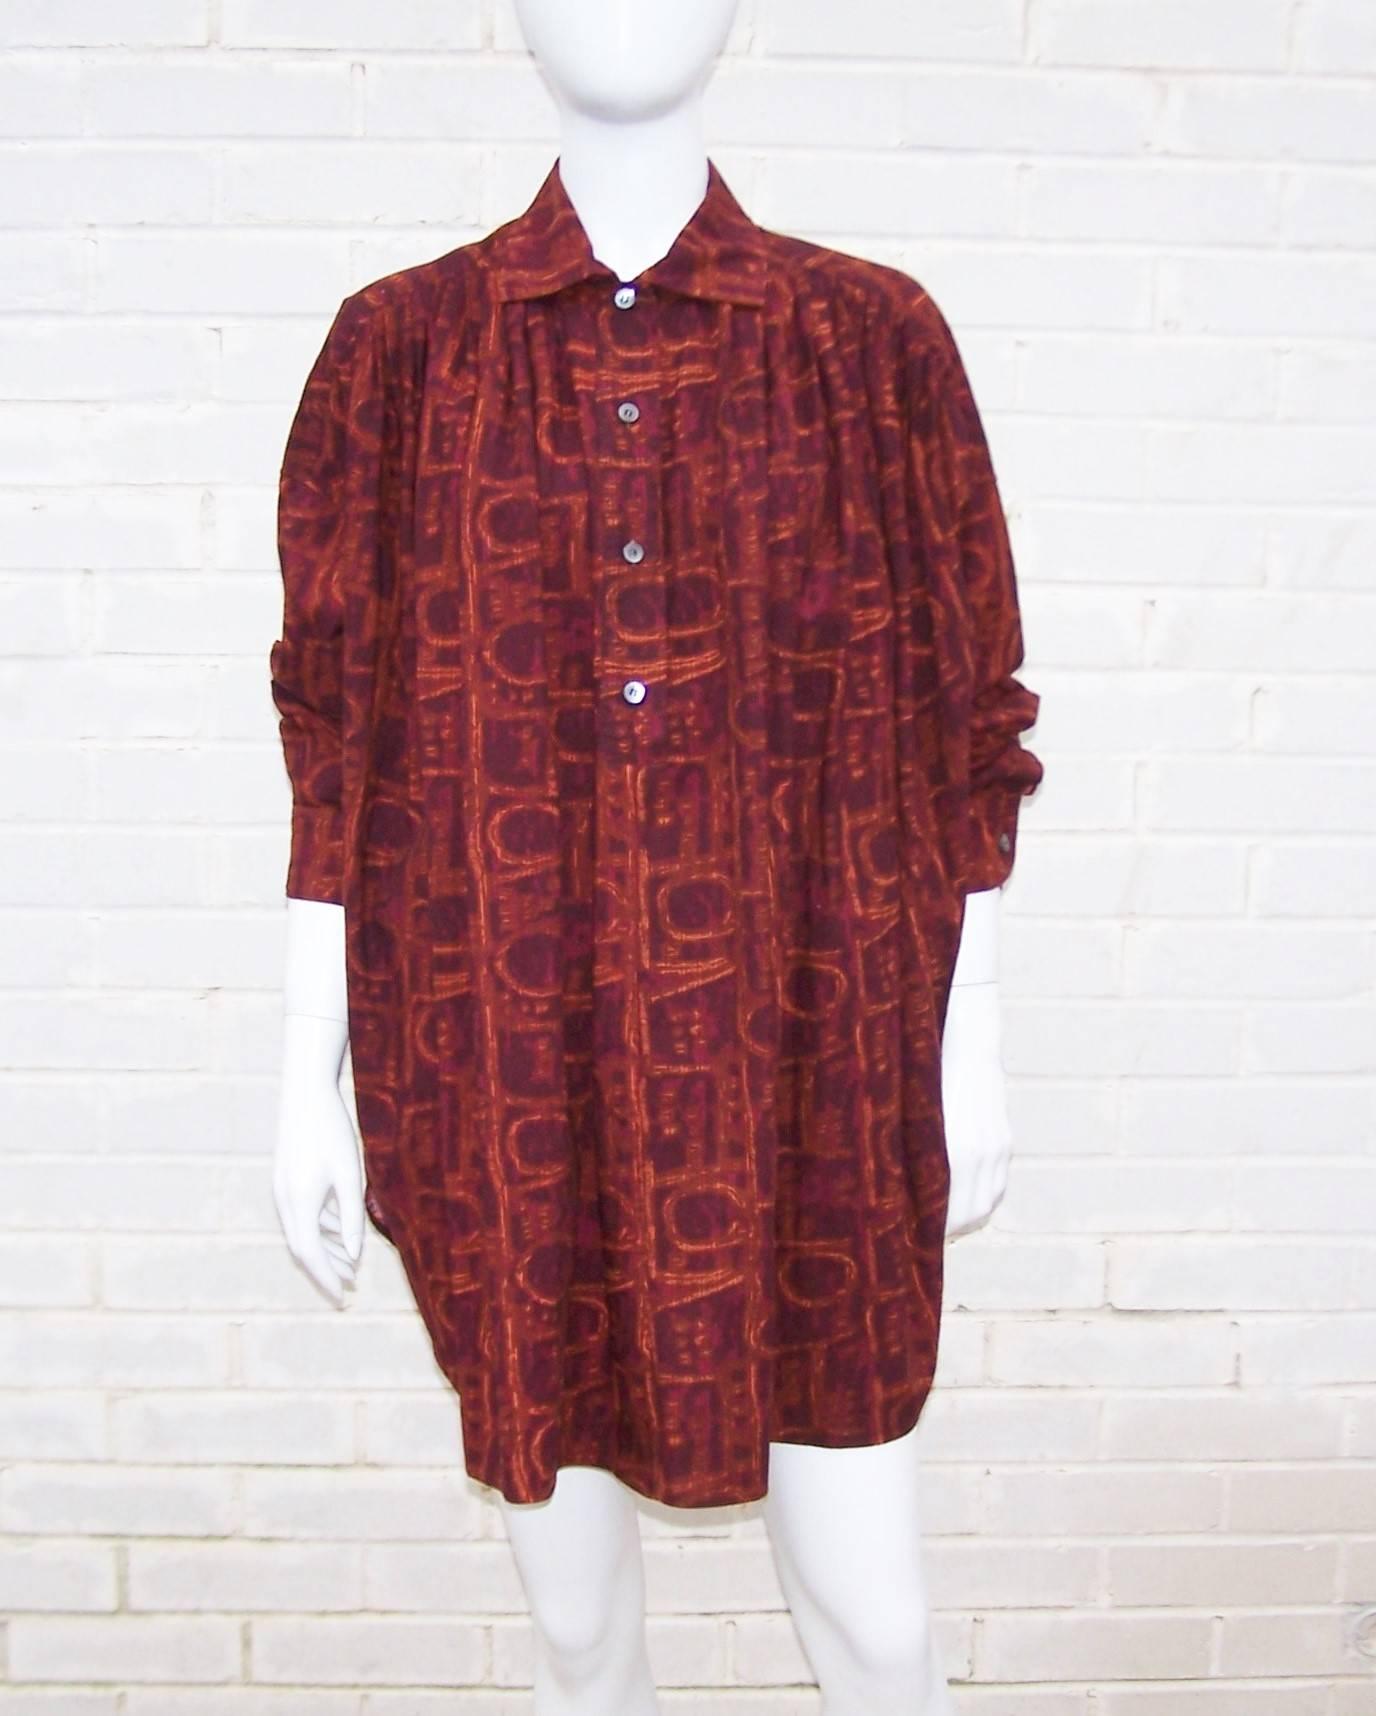 This 1980's design from the Italian firm, Callaghan, combines a voluminous smock top silhouette with an amazing cotton fabric that incorporates rich dark burgundy, brown, red and orange colors with a tribal motif.  The top buttons half way at the